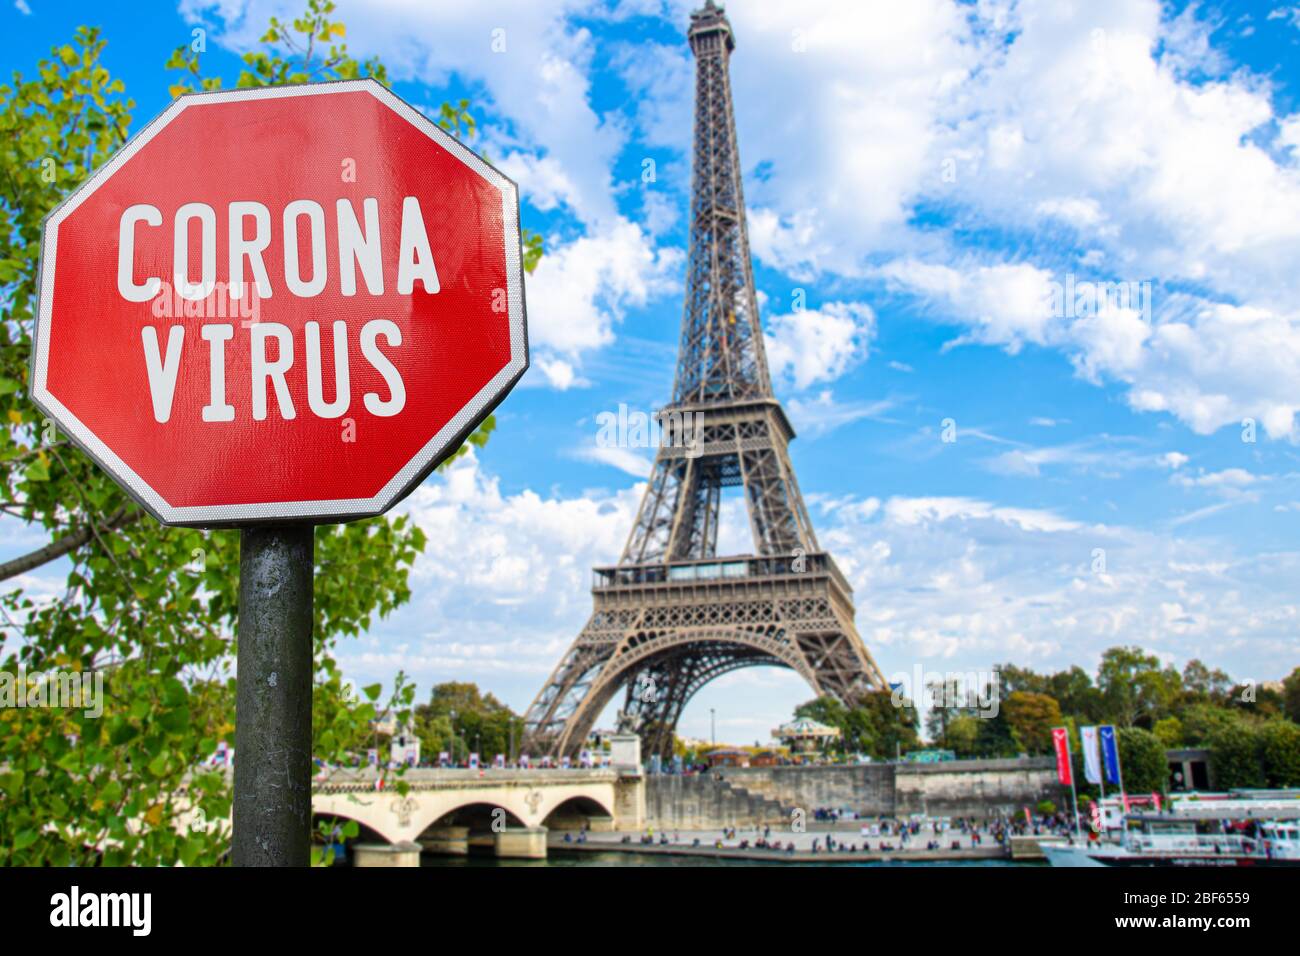 Corona virus sign with Eiffel tower in Paris, France. Warning about pandemic in France. Coronavirus disease. COVID-2019 alert sign Stock Photo